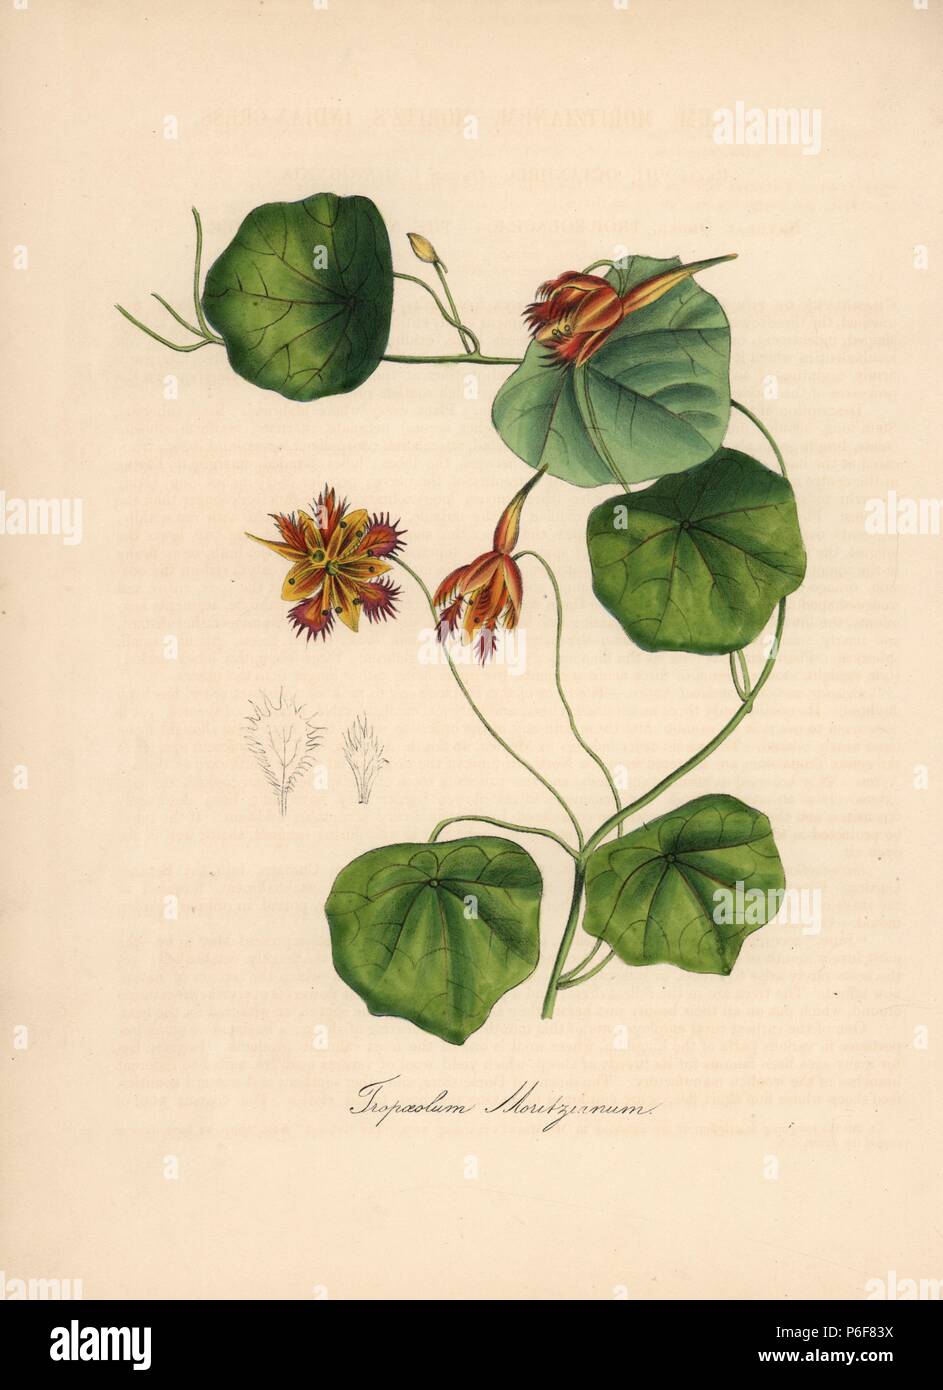 Nasturtium, Tropaeolum moritzianum. Handcoloured zincograph by C. Chabot drawn by Miss M. A. Burnett from her 'Plantae Utiliores: or Illustrations of Useful Plants,' Whittaker, London, 1842. Miss Burnett drew the botanical illustrations, but the text was chiefly by her late brother, British botanist Gilbert Thomas Burnett (1800-1835). Stock Photo